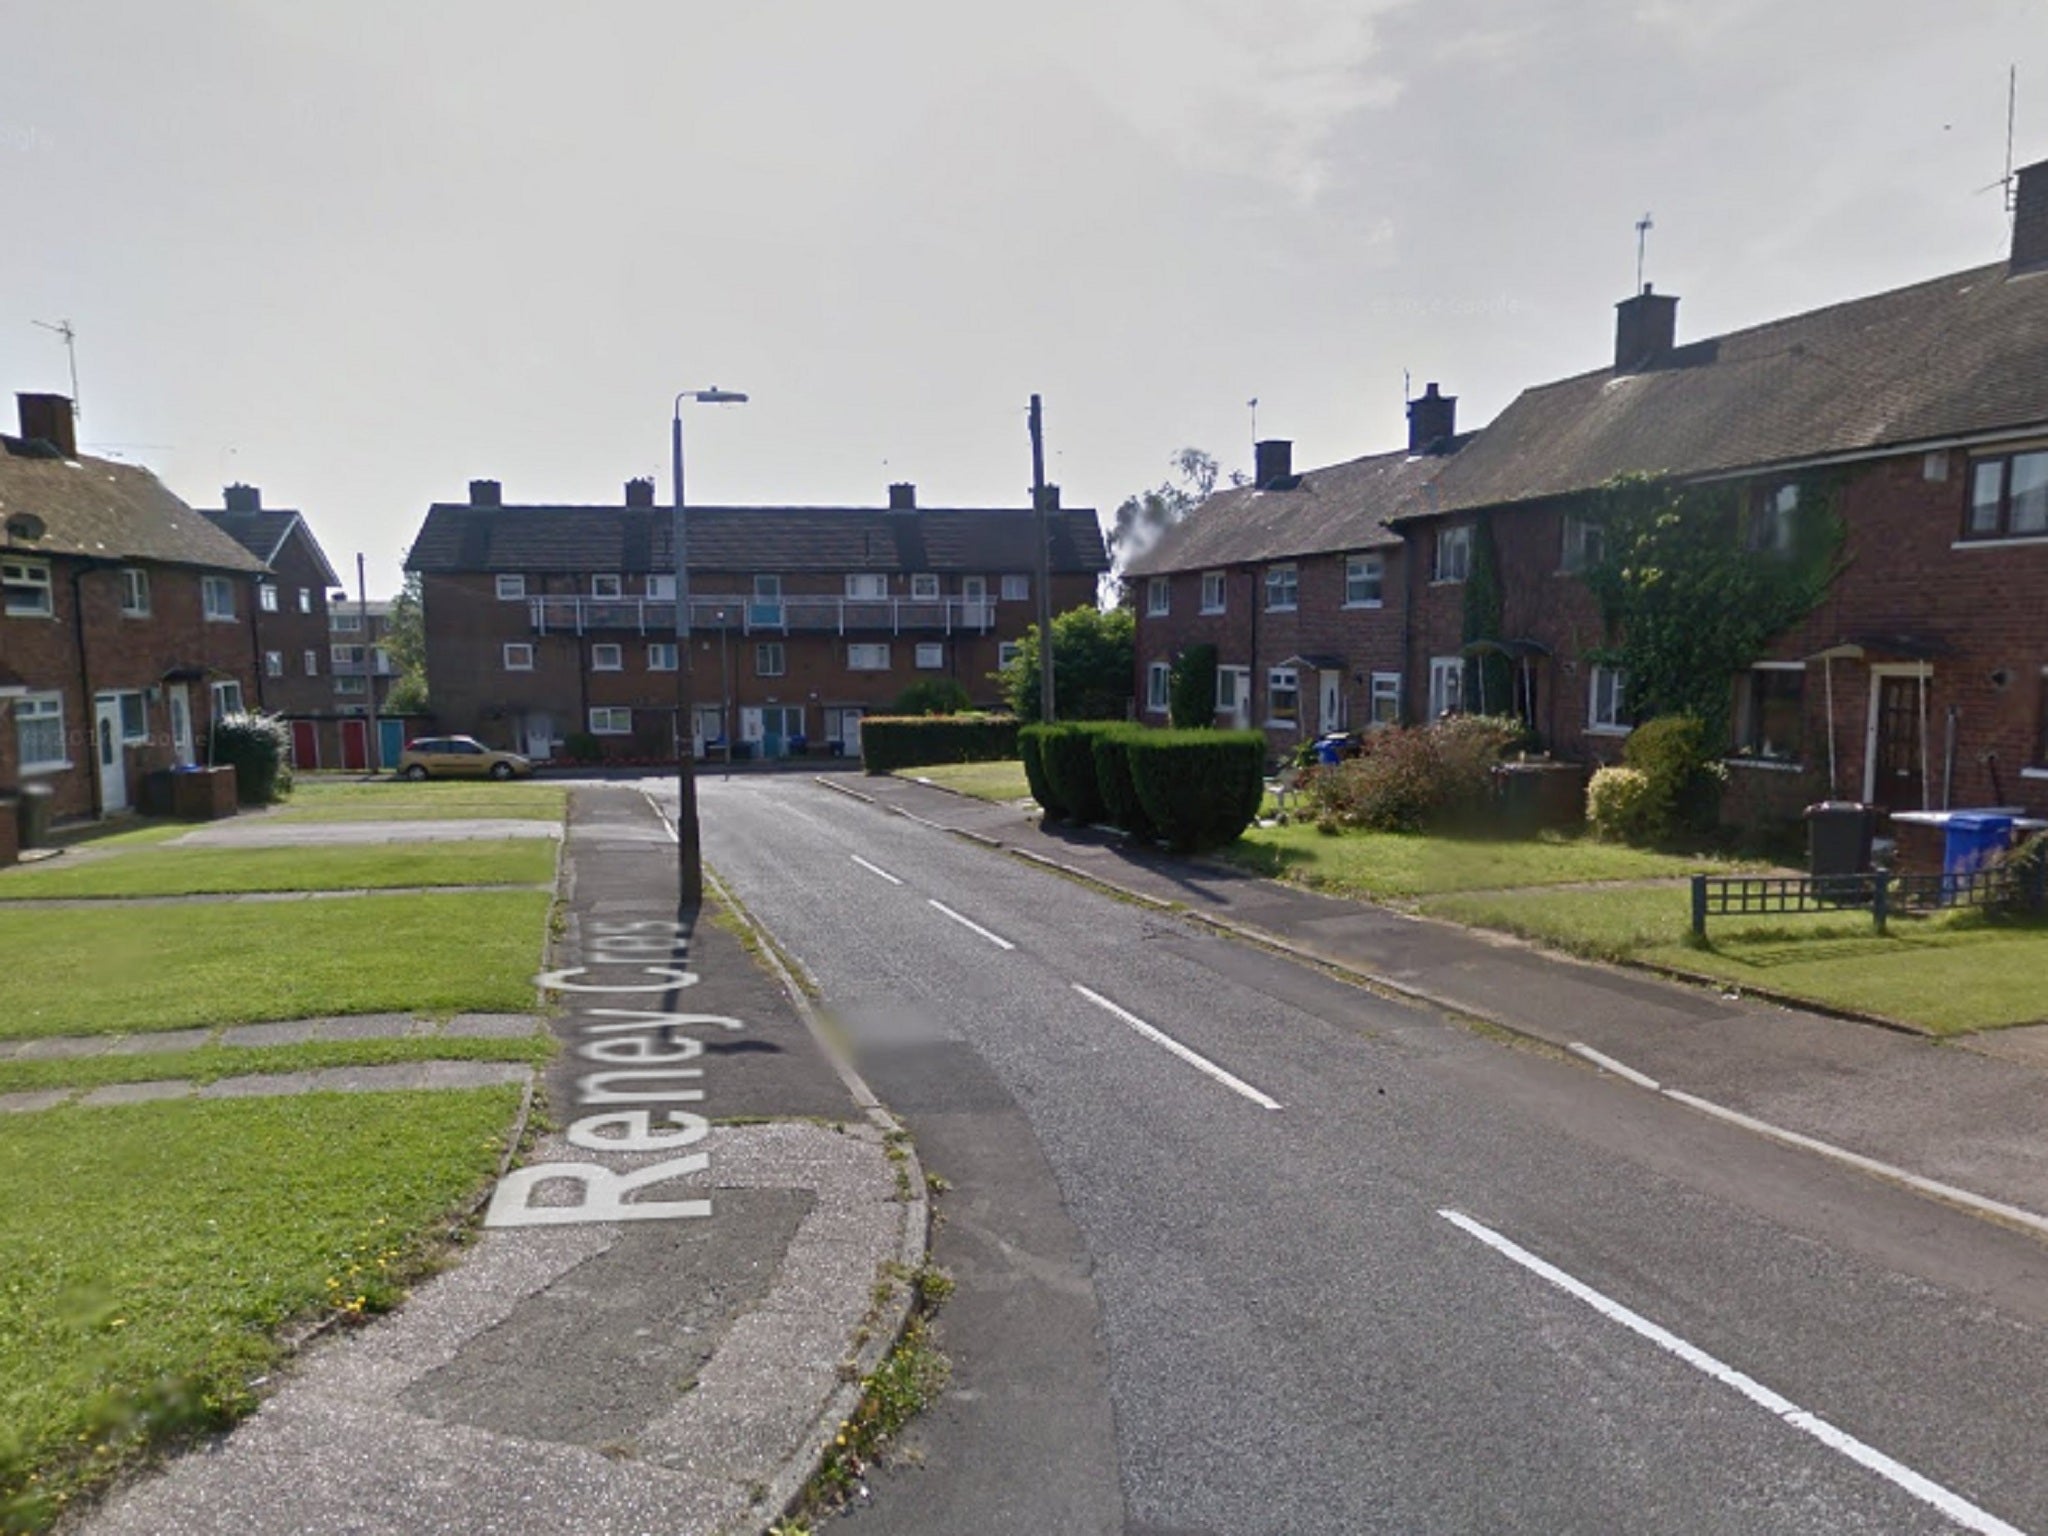 Reney Crescent is the residential street that Stephen Starkey lived on, where he was attacked before he died